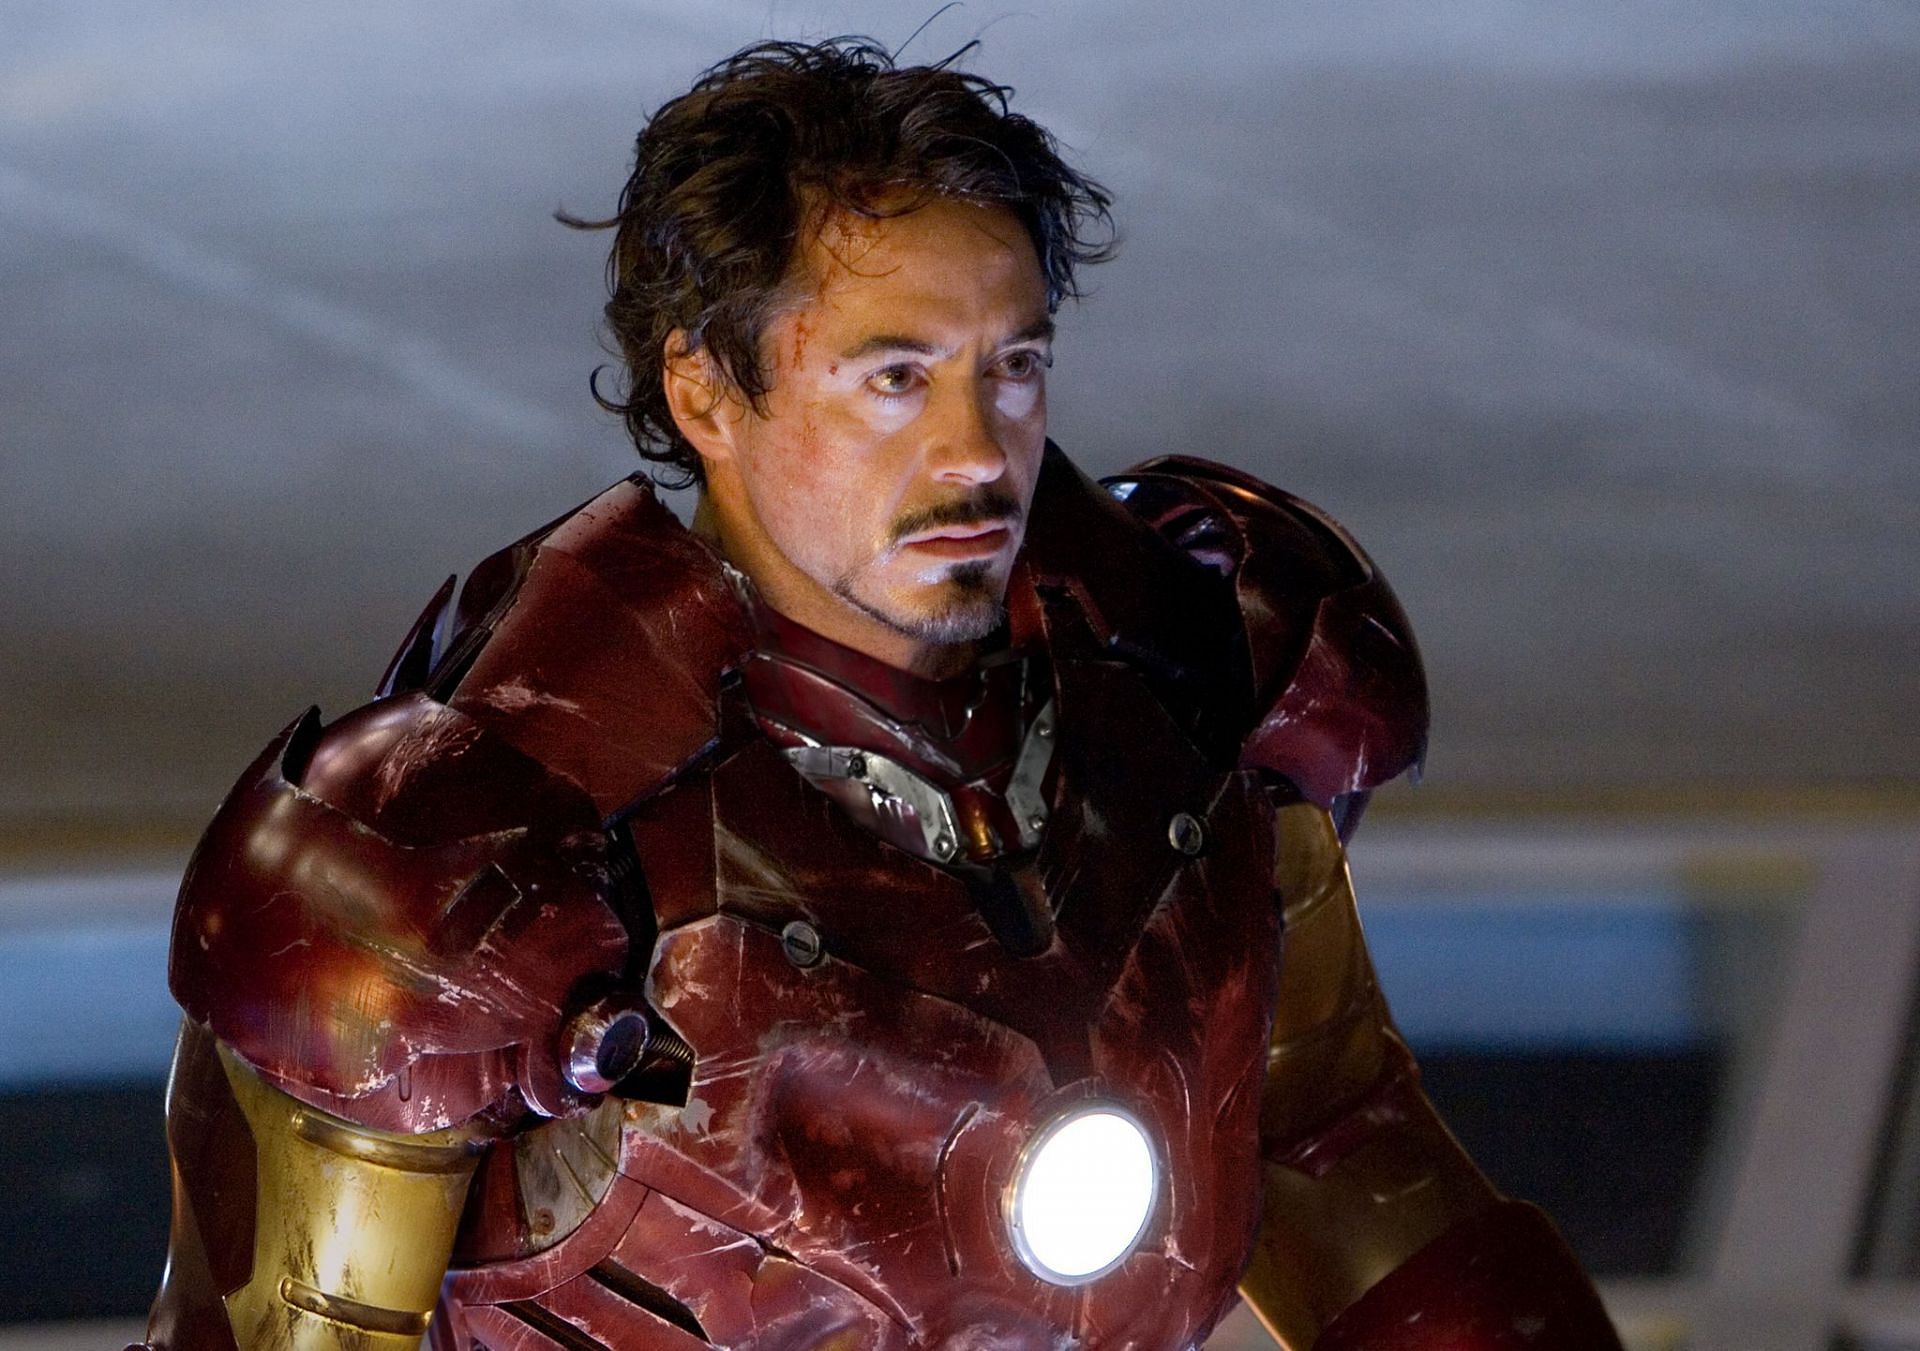 The return of the man who started it all - Robert Downey Jr. as Iron Man (Image via Marvel Studios)